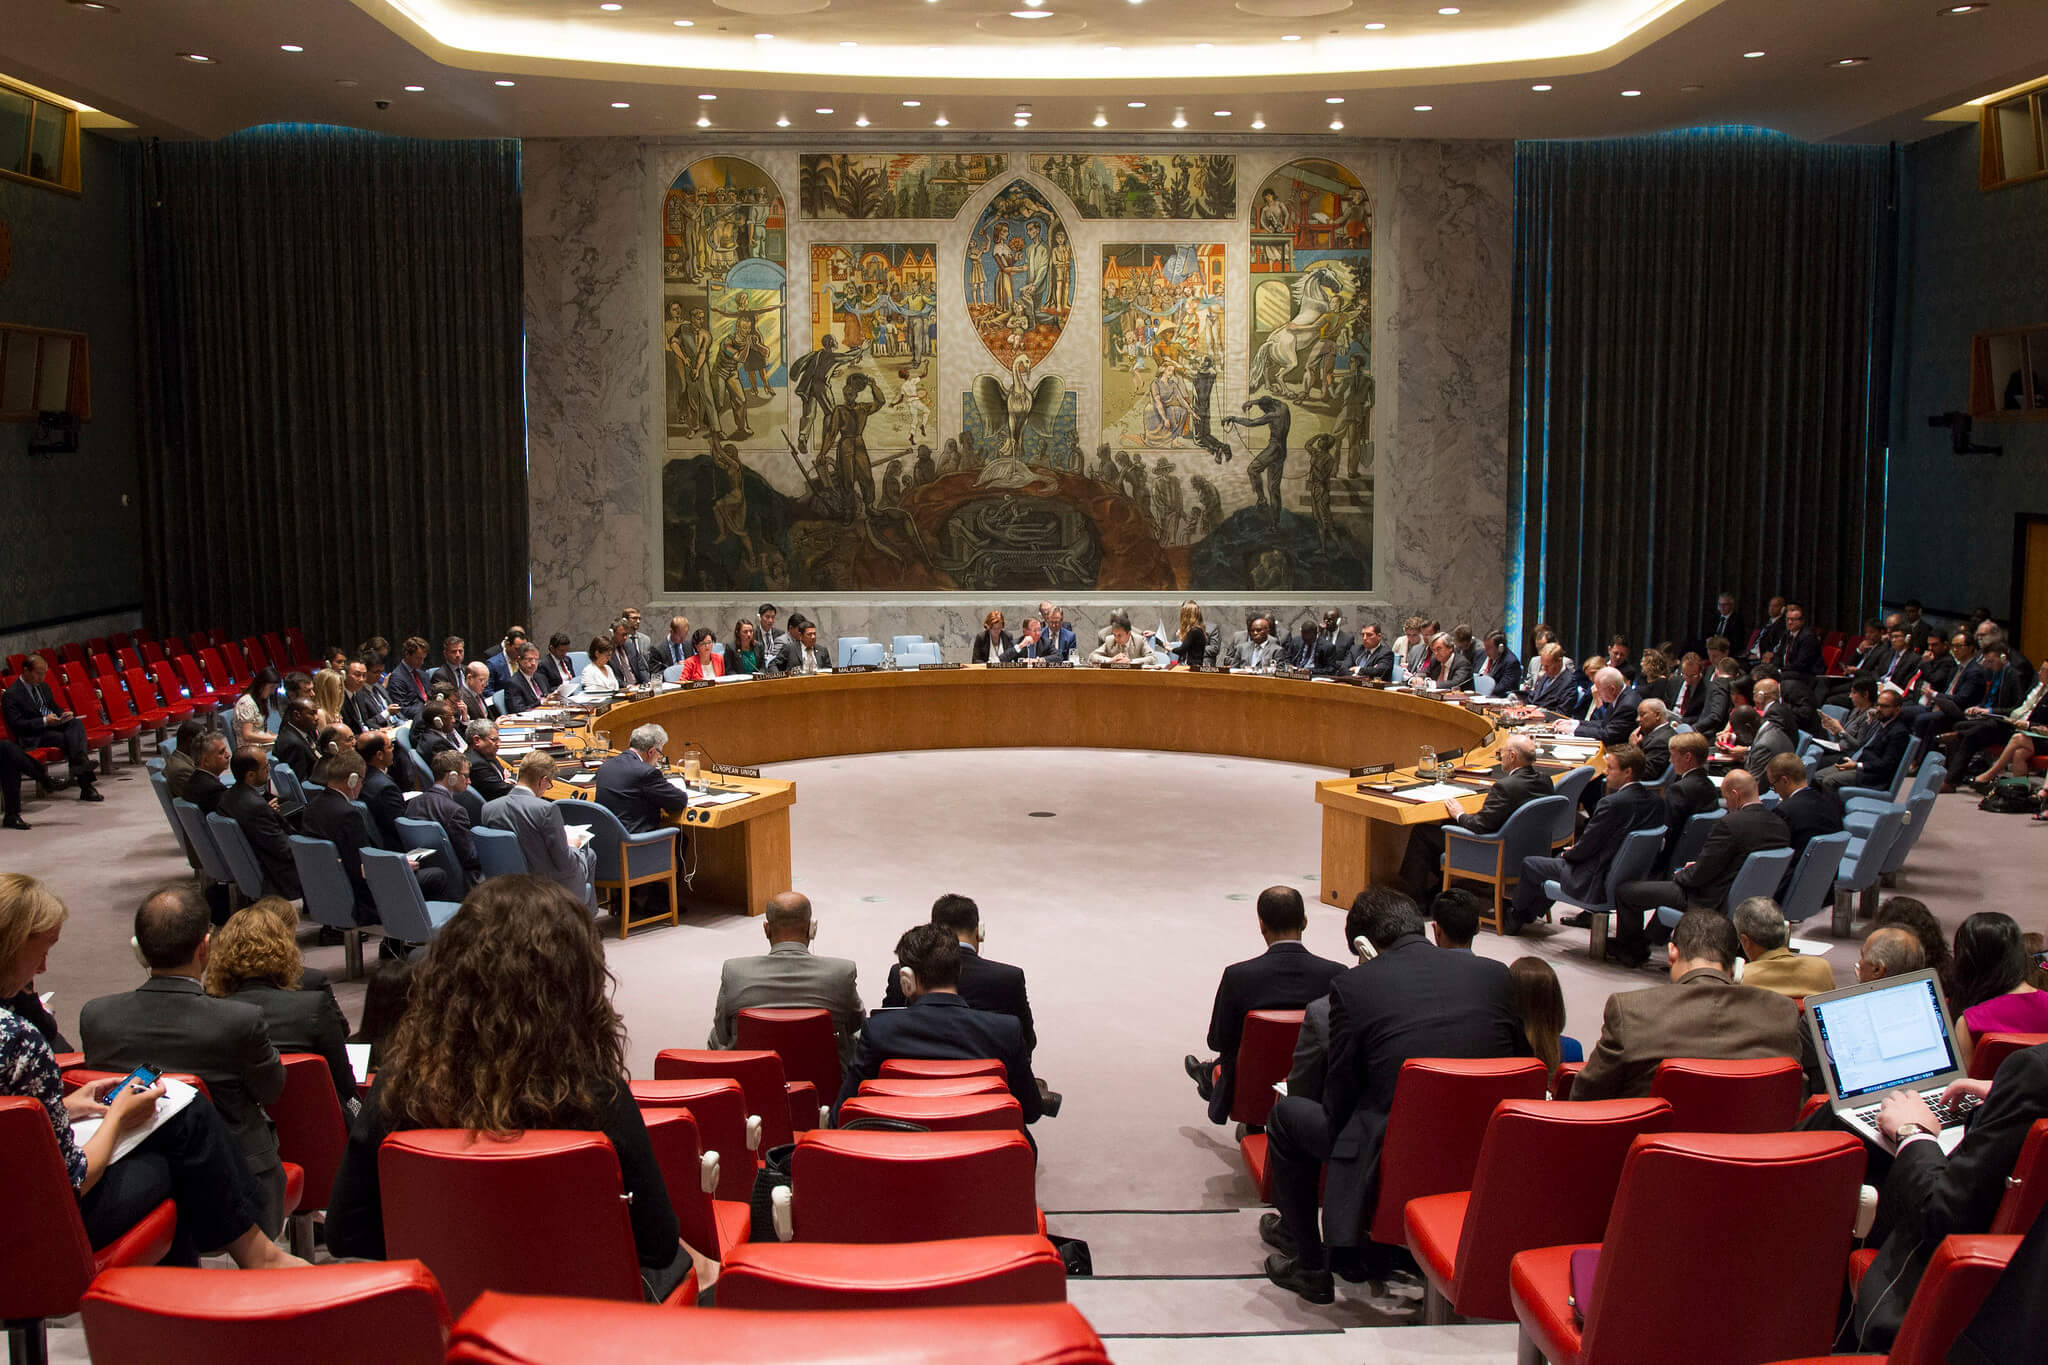 Erasto-The UN Security Council adopts the Resolution on a Joint Comprehensive Plan of Action (JCPOA) regarding Iran’s nuclear programme on July 12 2015. UN Photo